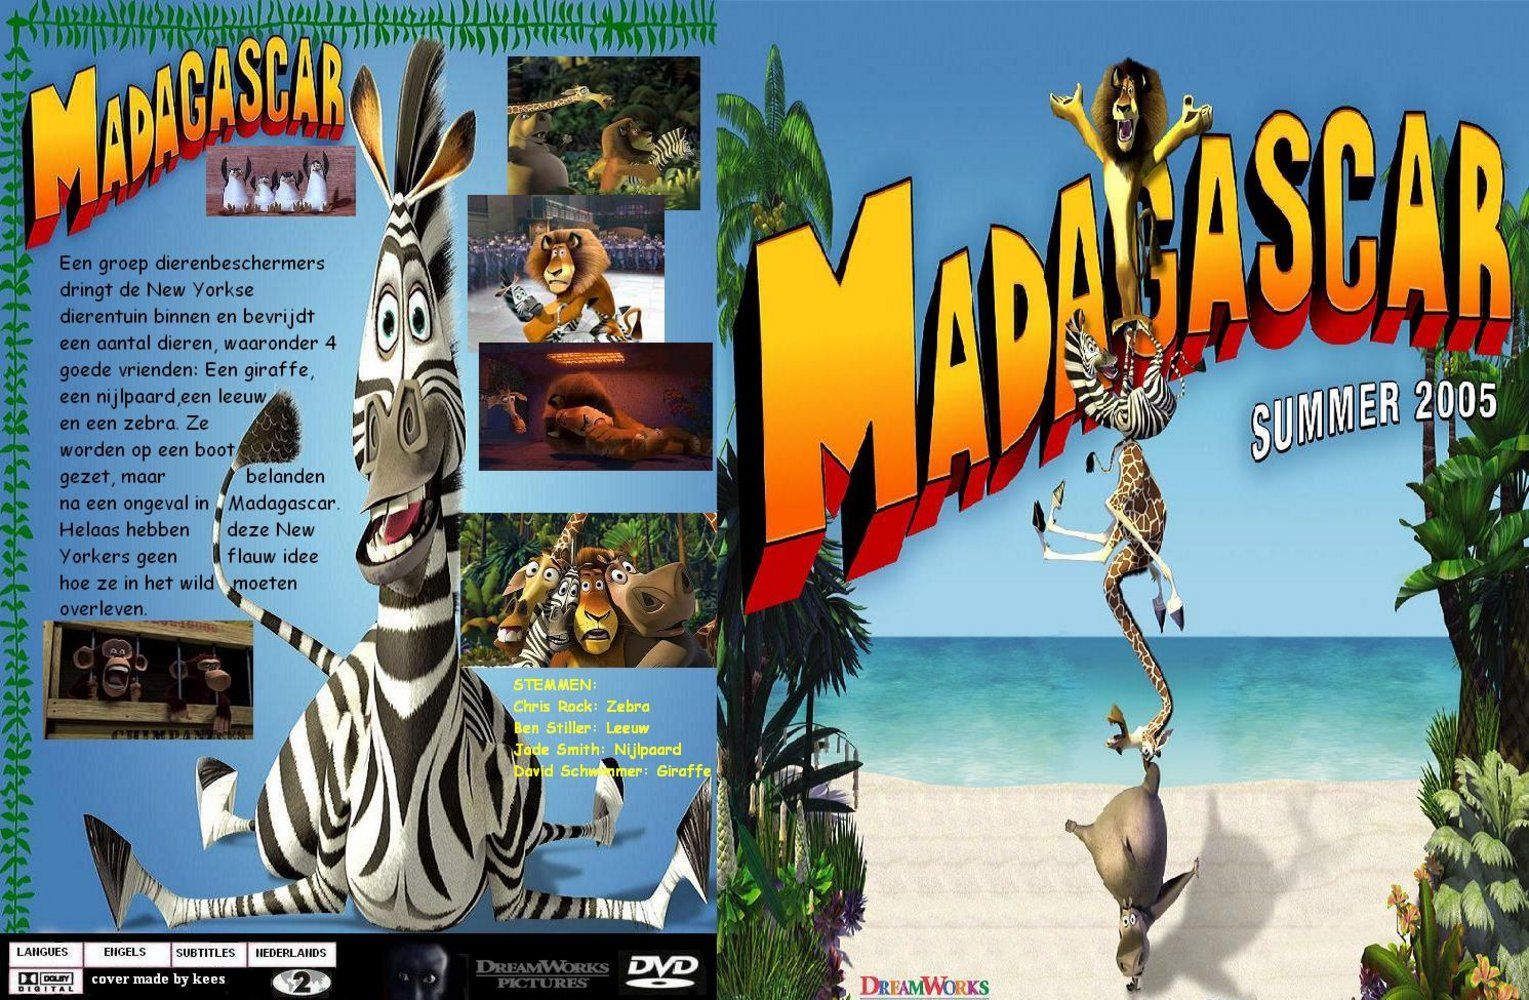 Madagascar Misc Dvd Dvd Covers Cover Century Over 500 000 Album Art Covers For Free